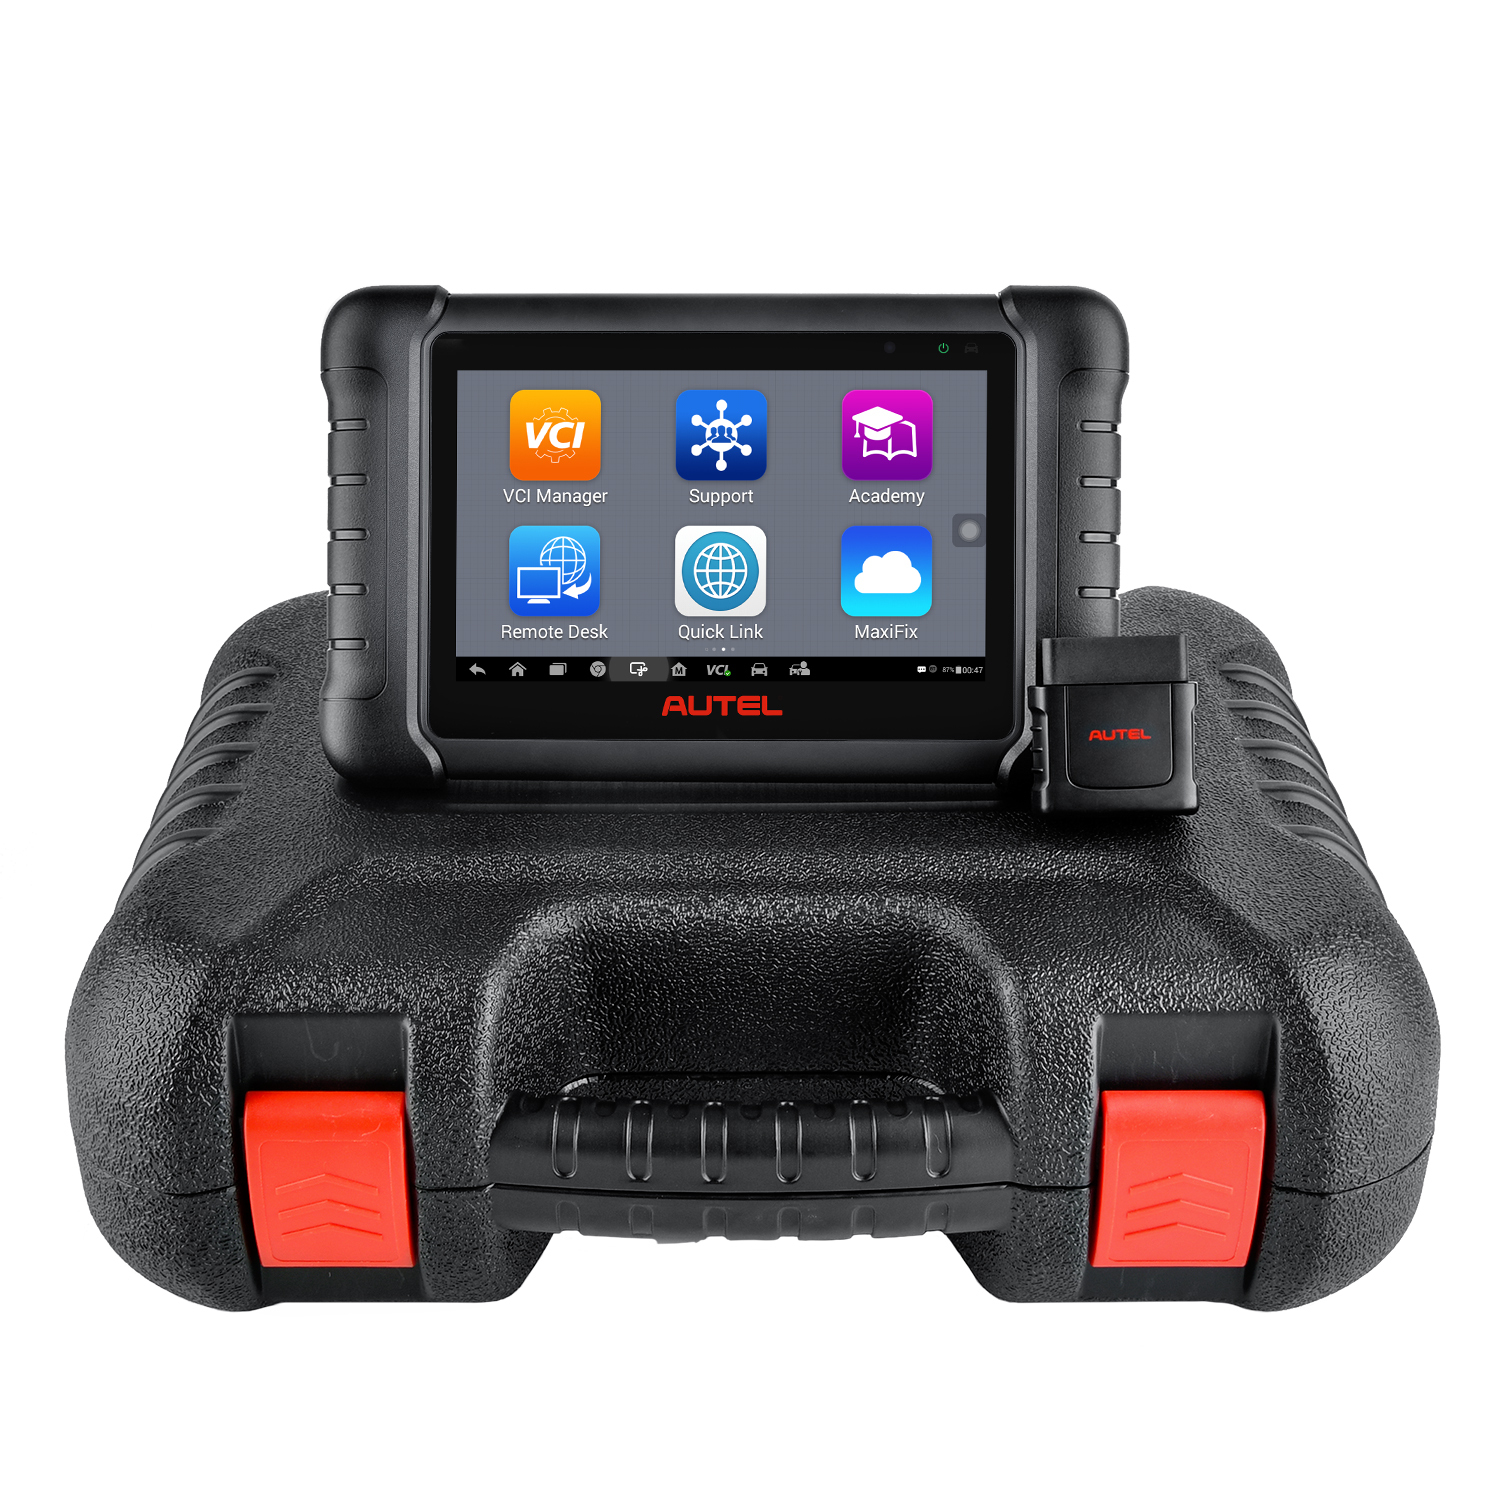 Autel MaxiPRO MP808BT Pro Wireless Diagnostic Scanner, Upgrade of